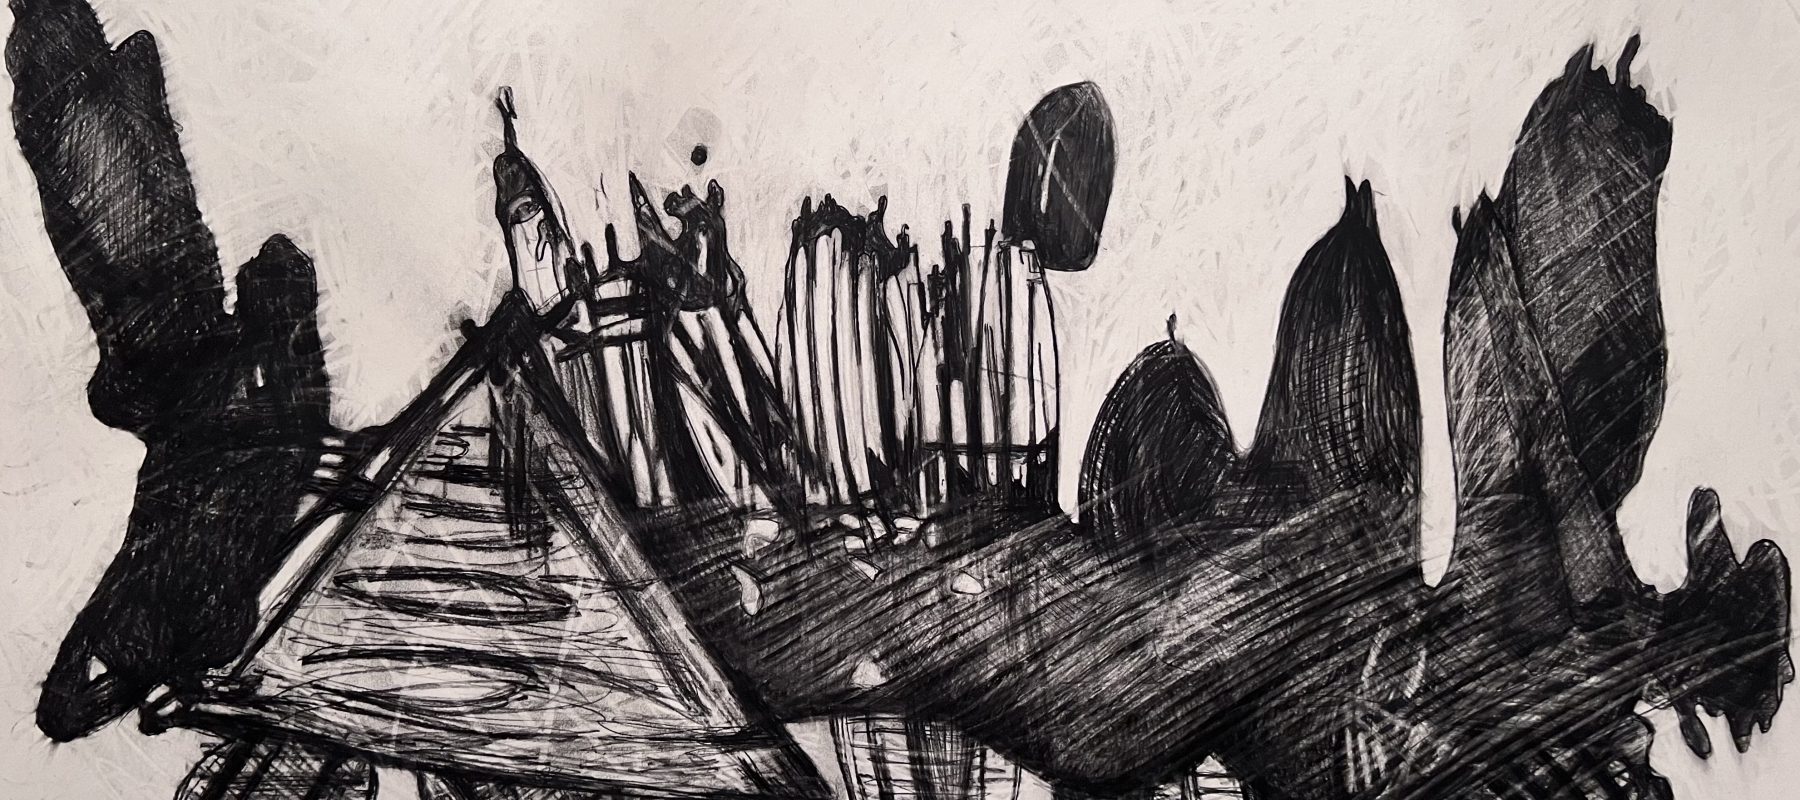 Black astract art: James Ackerly Porter, Birthday Tank, 2012, charcoal on paper; Courtesy of the artist.